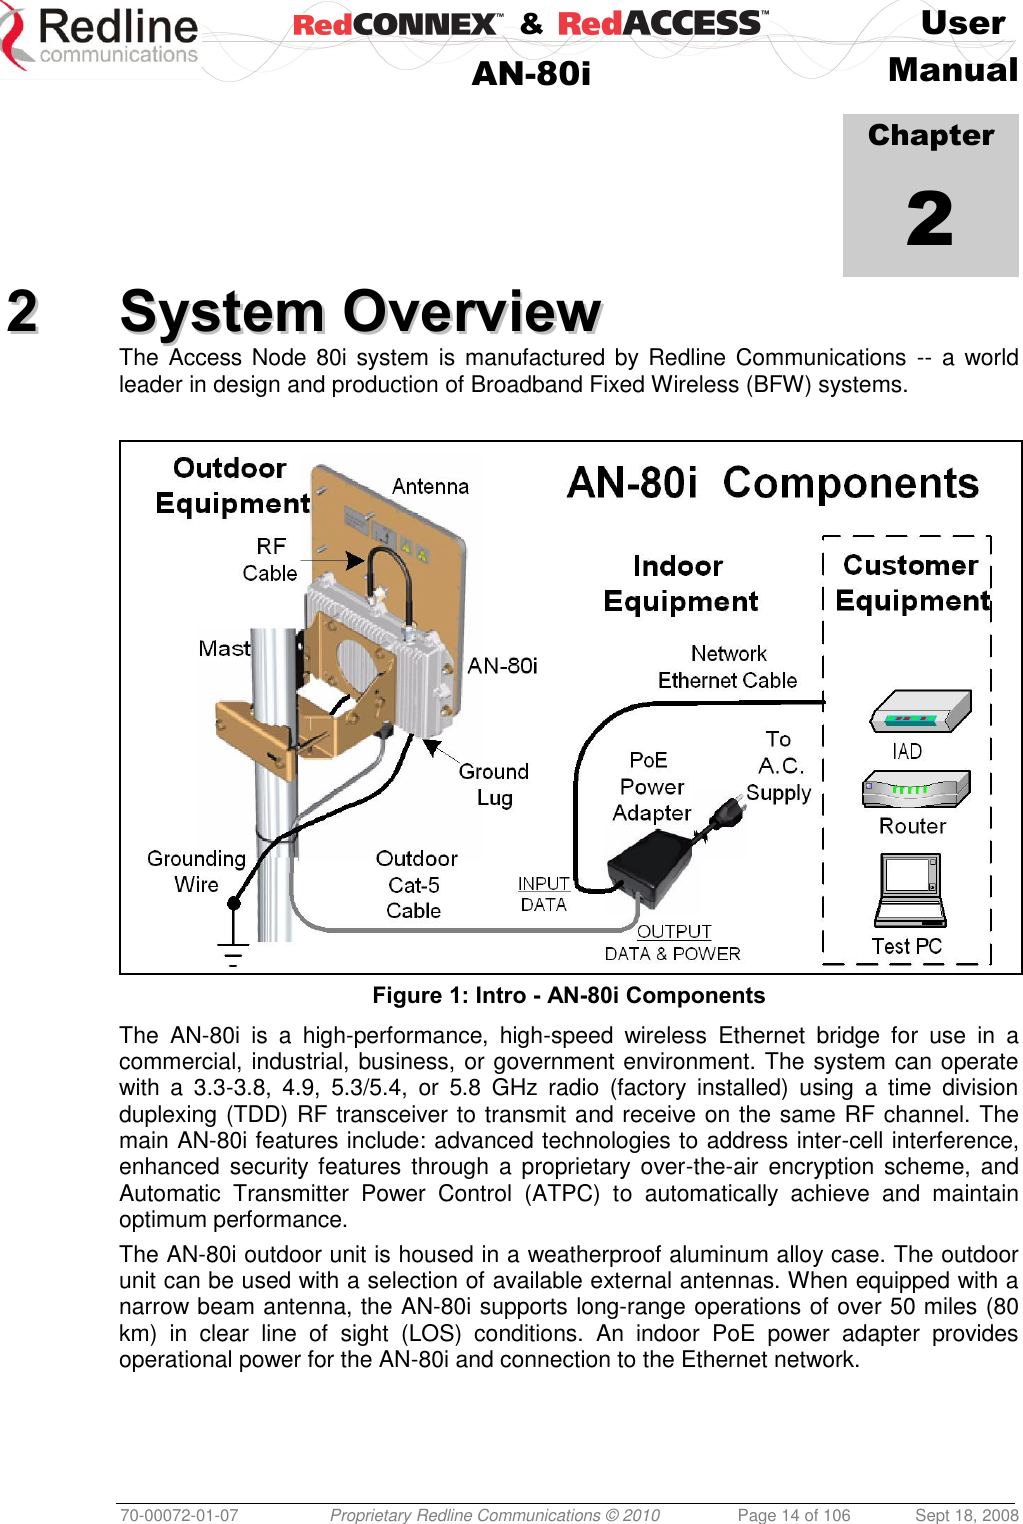    &amp;  User  AN-80i Manual  70-00072-01-07 Proprietary Redline Communications © 2010  Page 14 of 106  Sept 18, 2008            Chapter 2 22  SSyysstteemm  OOvveerrvviieeww  The Access Node 80i system is manufactured by Redline Communications  --  a world leader in design and production of Broadband Fixed Wireless (BFW) systems.   Figure 1: Intro - AN-80i Components The  AN-80i  is  a  high-performance,  high-speed  wireless  Ethernet  bridge  for  use  in  a commercial, industrial, business, or government environment. The system can operate with  a  3.3-3.8,  4.9,  5.3/5.4,  or  5.8  GHz  radio  (factory  installed)  using  a  time  division duplexing (TDD) RF transceiver to transmit and receive on the same RF channel. The main AN-80i features include: advanced technologies to address inter-cell interference, enhanced security features through  a  proprietary over-the-air  encryption scheme,  and Automatic  Transmitter  Power  Control  (ATPC)  to  automatically  achieve  and  maintain optimum performance. The AN-80i outdoor unit is housed in a weatherproof aluminum alloy case. The outdoor unit can be used with a selection of available external antennas. When equipped with a narrow beam antenna, the AN-80i supports long-range operations of over 50 miles (80 km)  in  clear  line  of  sight  (LOS)  conditions.  An  indoor  PoE  power  adapter  provides operational power for the AN-80i and connection to the Ethernet network. 